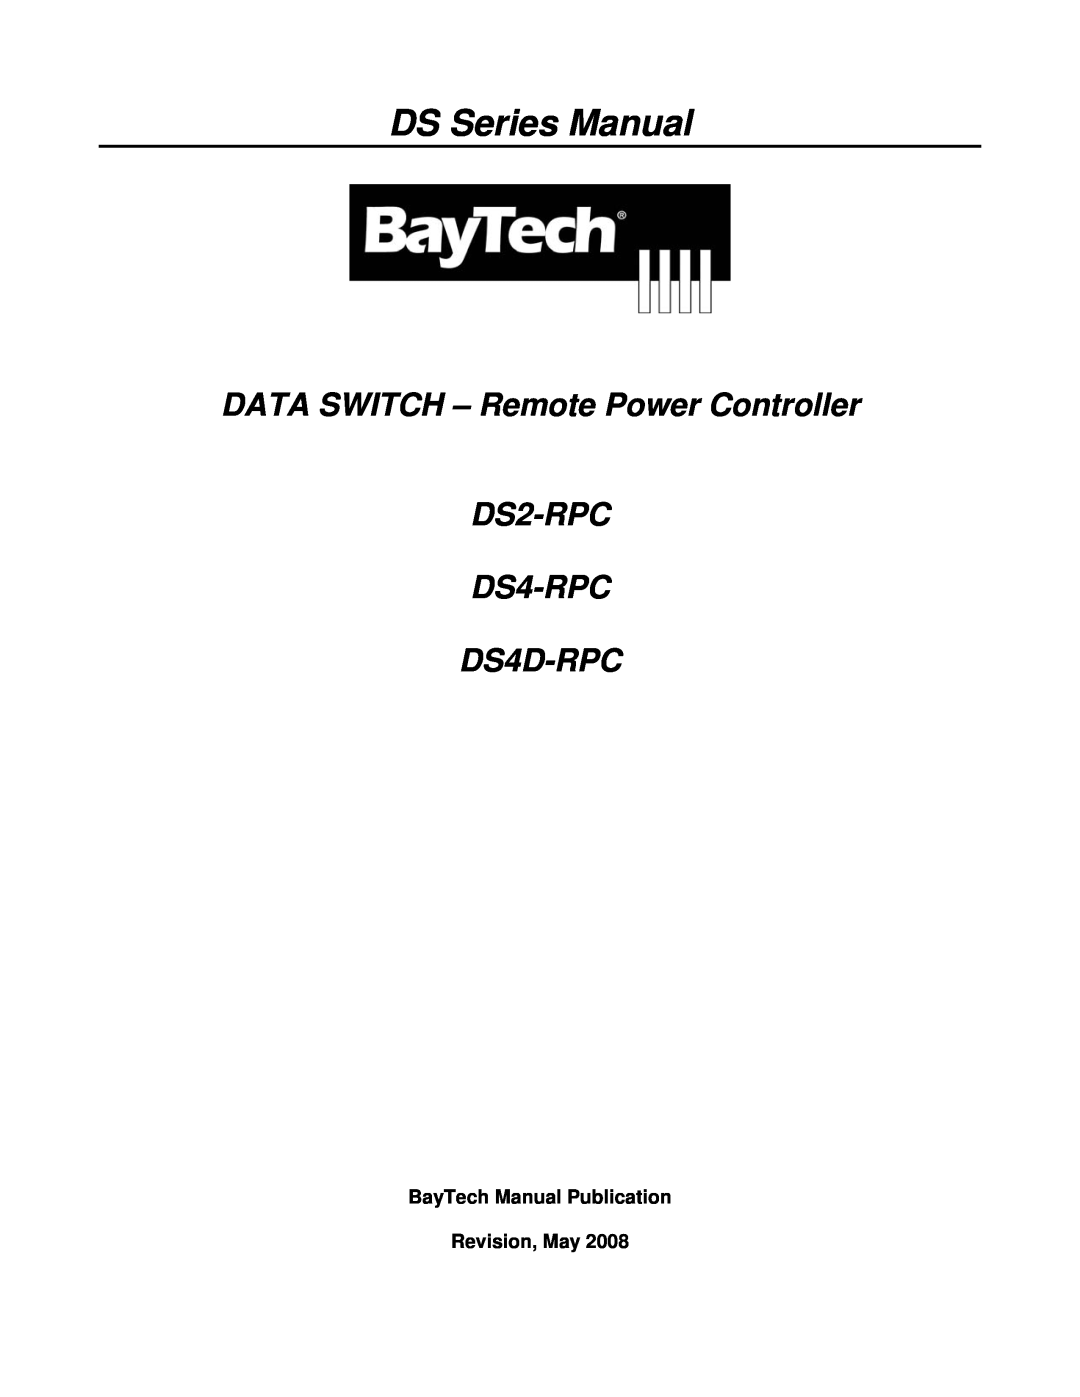 Bay Technical Associates manual DS Series Manual, DATA SWITCH - Remote Power Controller DS2-RPC DS4-RPC DS4D-RPC 